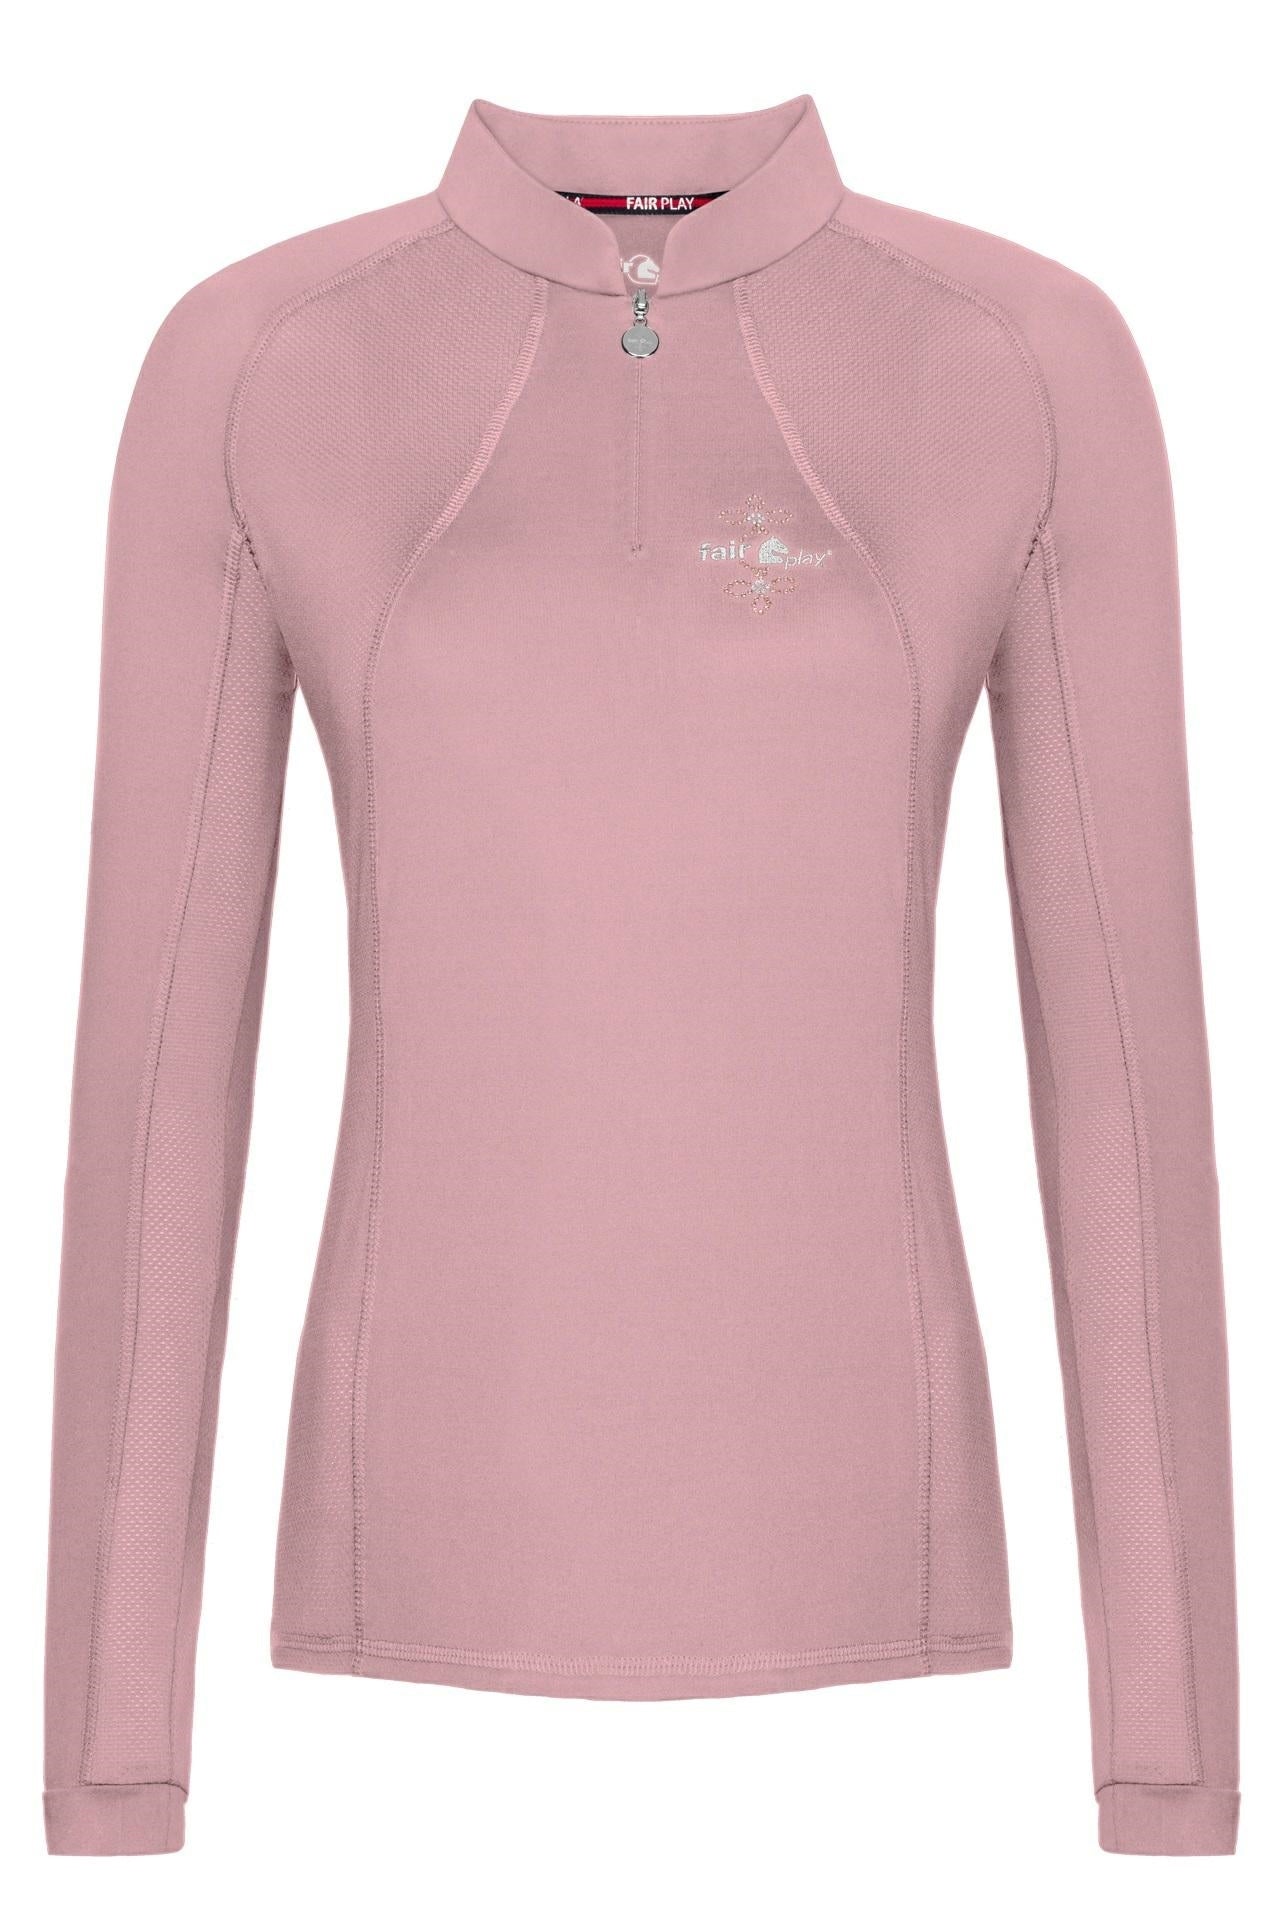 Pink equestrian base layer